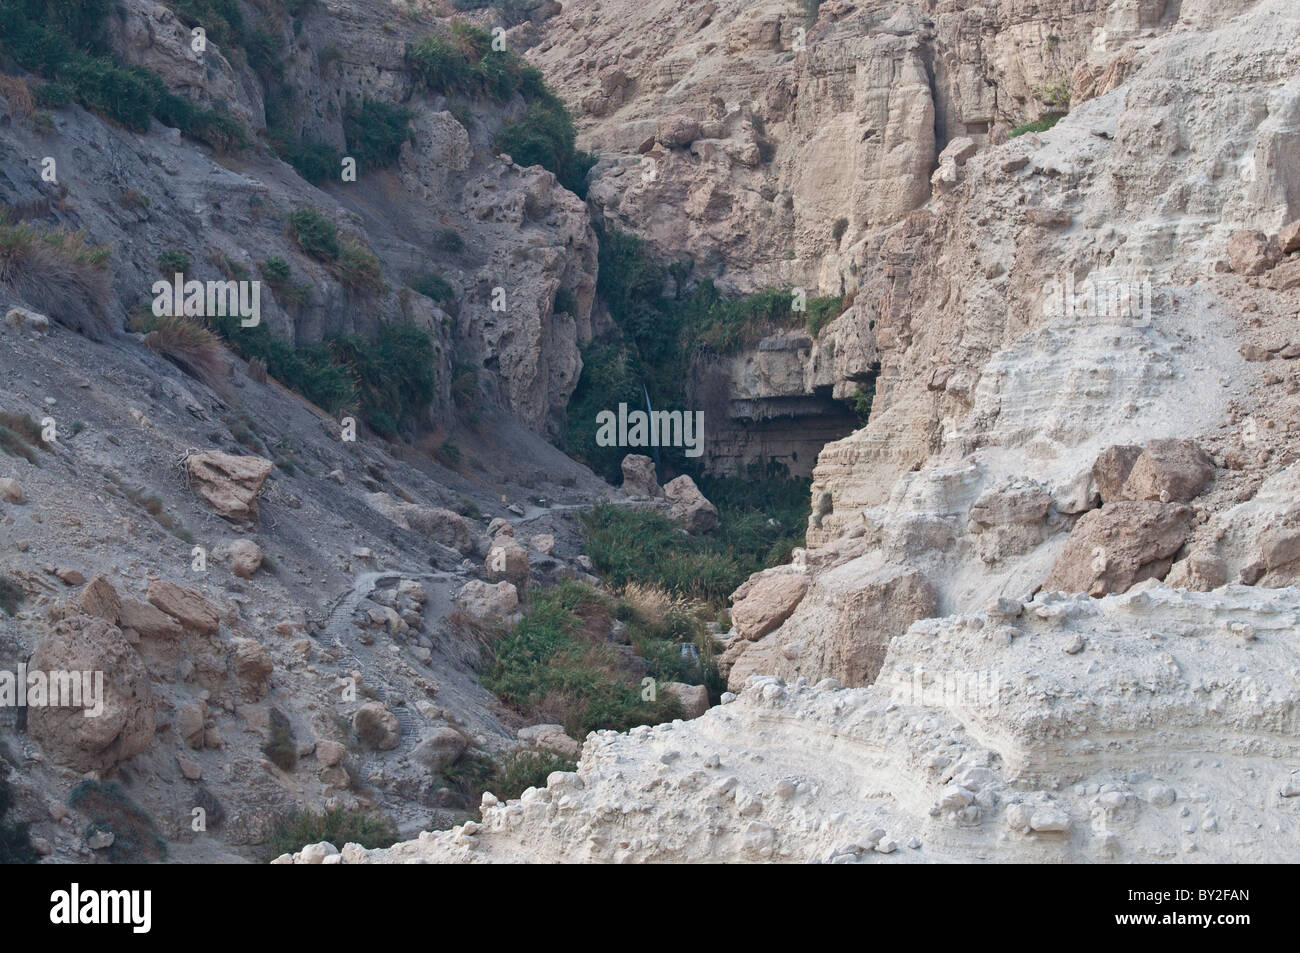 A view of the waterfall at Ein Gedi National Park. Stock Photo